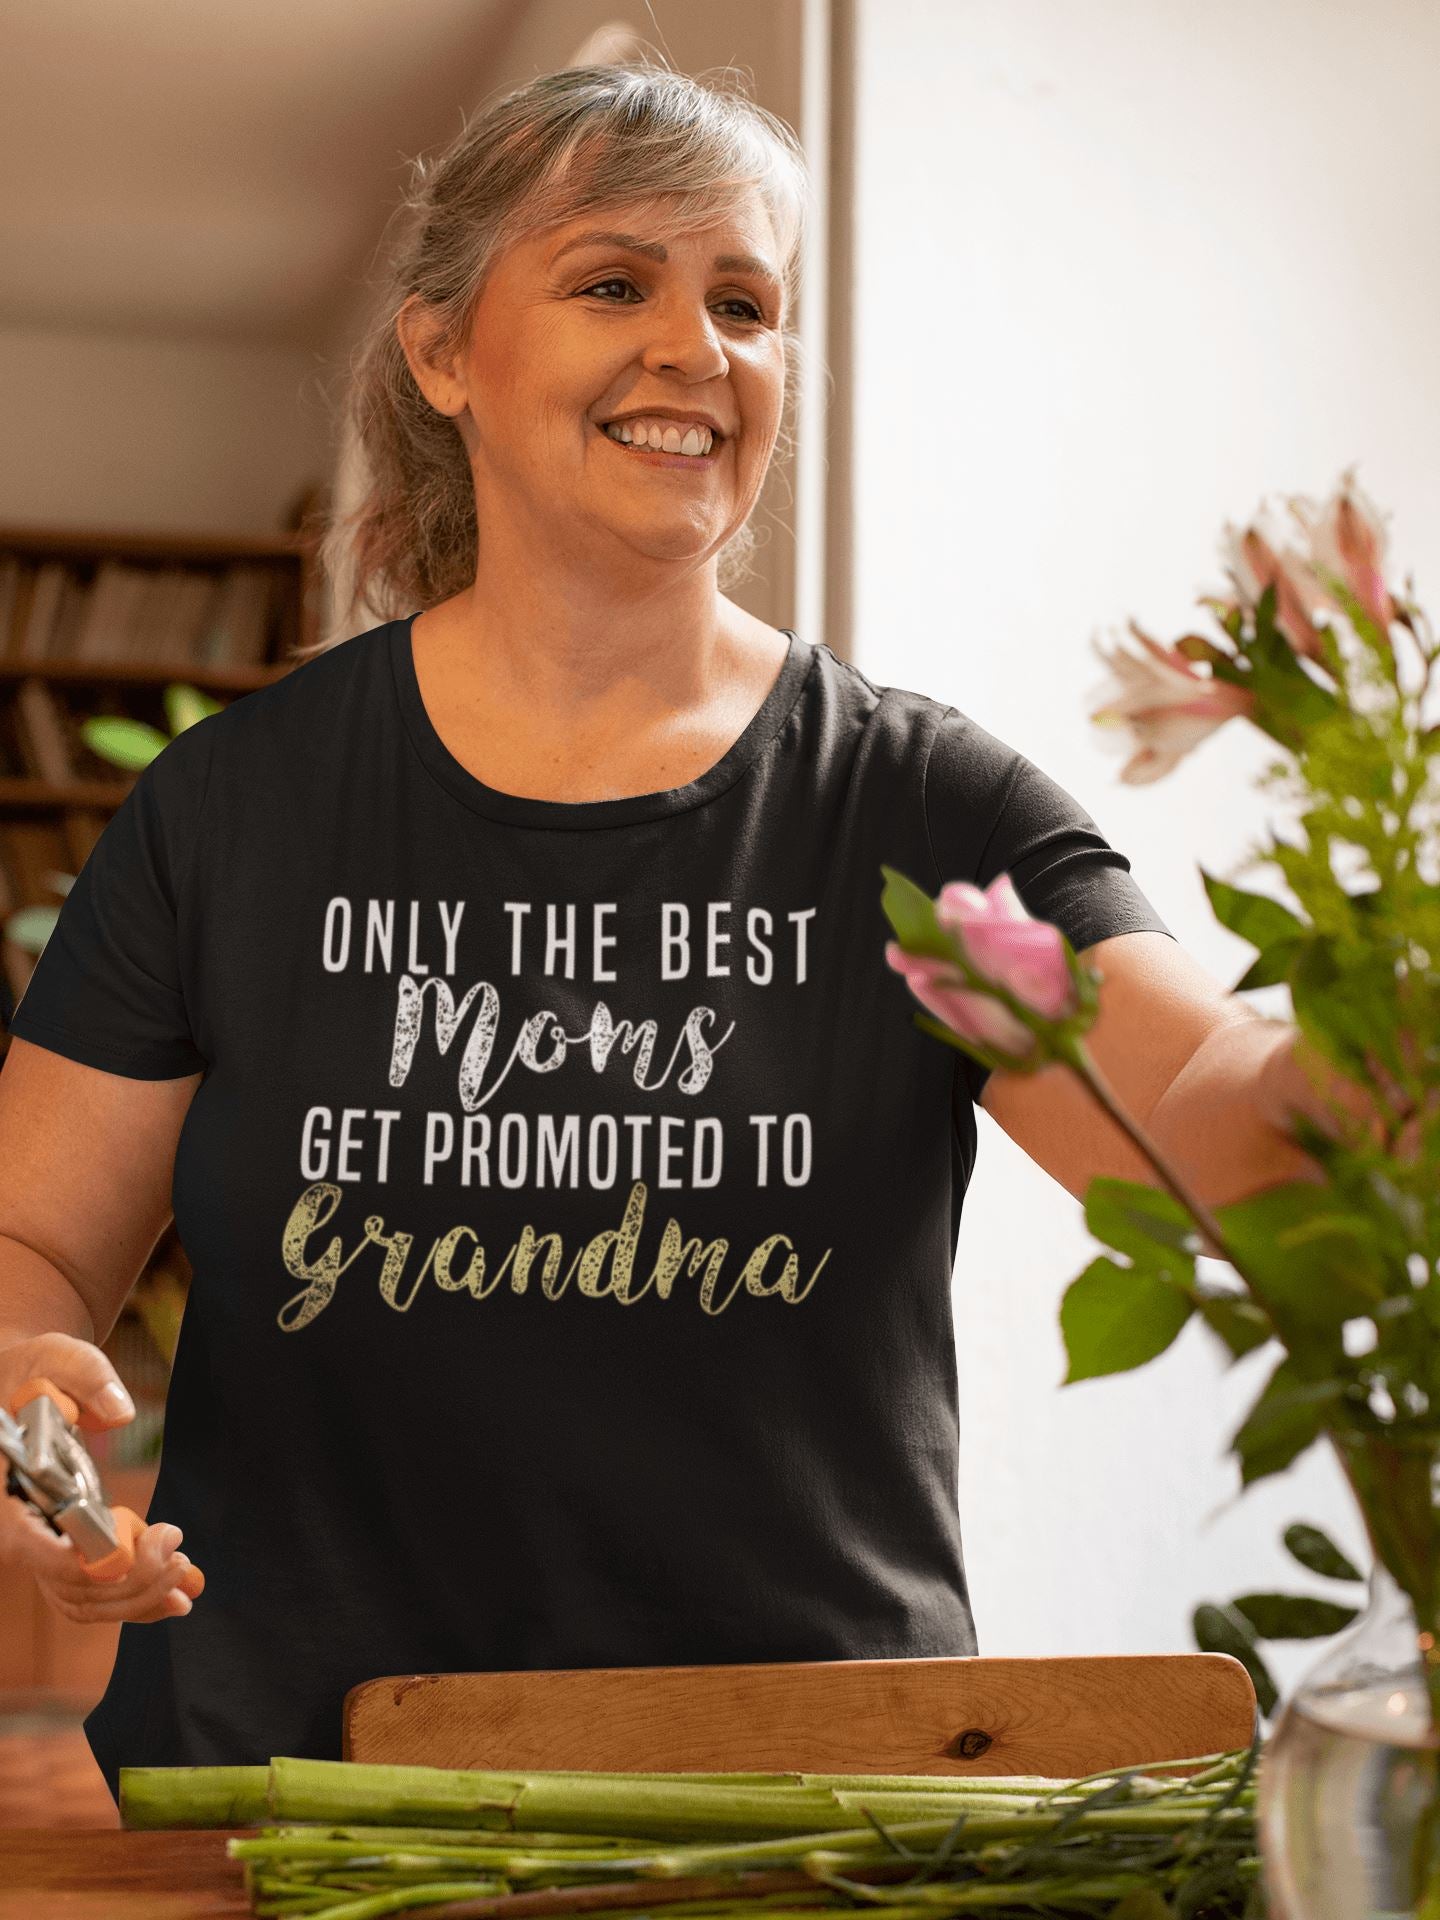 Only the Best Moms Get Promoted to Grandma Special T Shirt for Women - Catch My Drift India  black, clothing, female, grandma, grandparents, made in india, mom, mother, parents, shirt, t shir